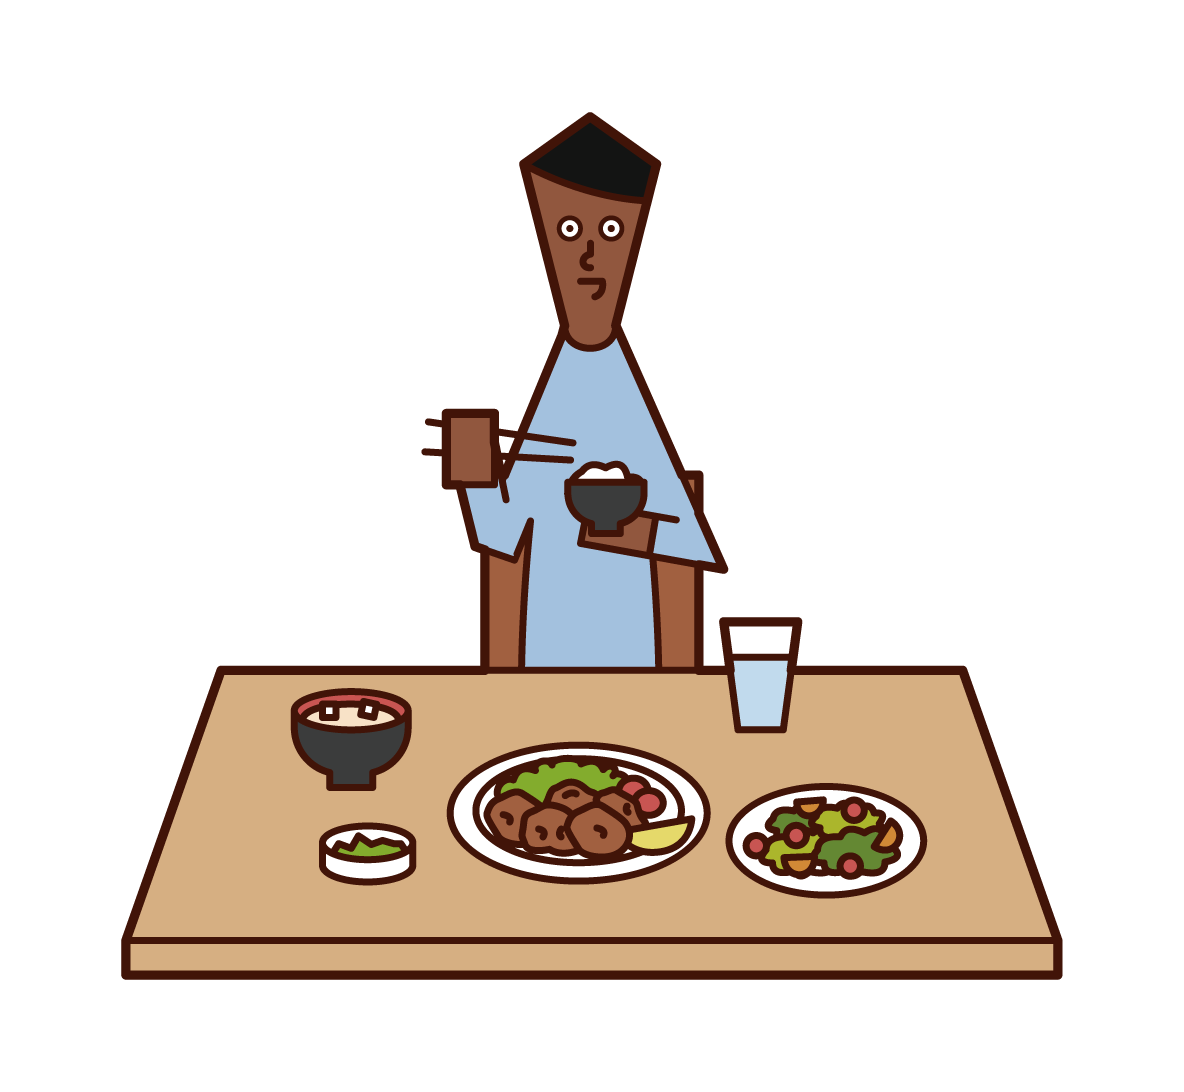 Illustration of the person (man) who eats